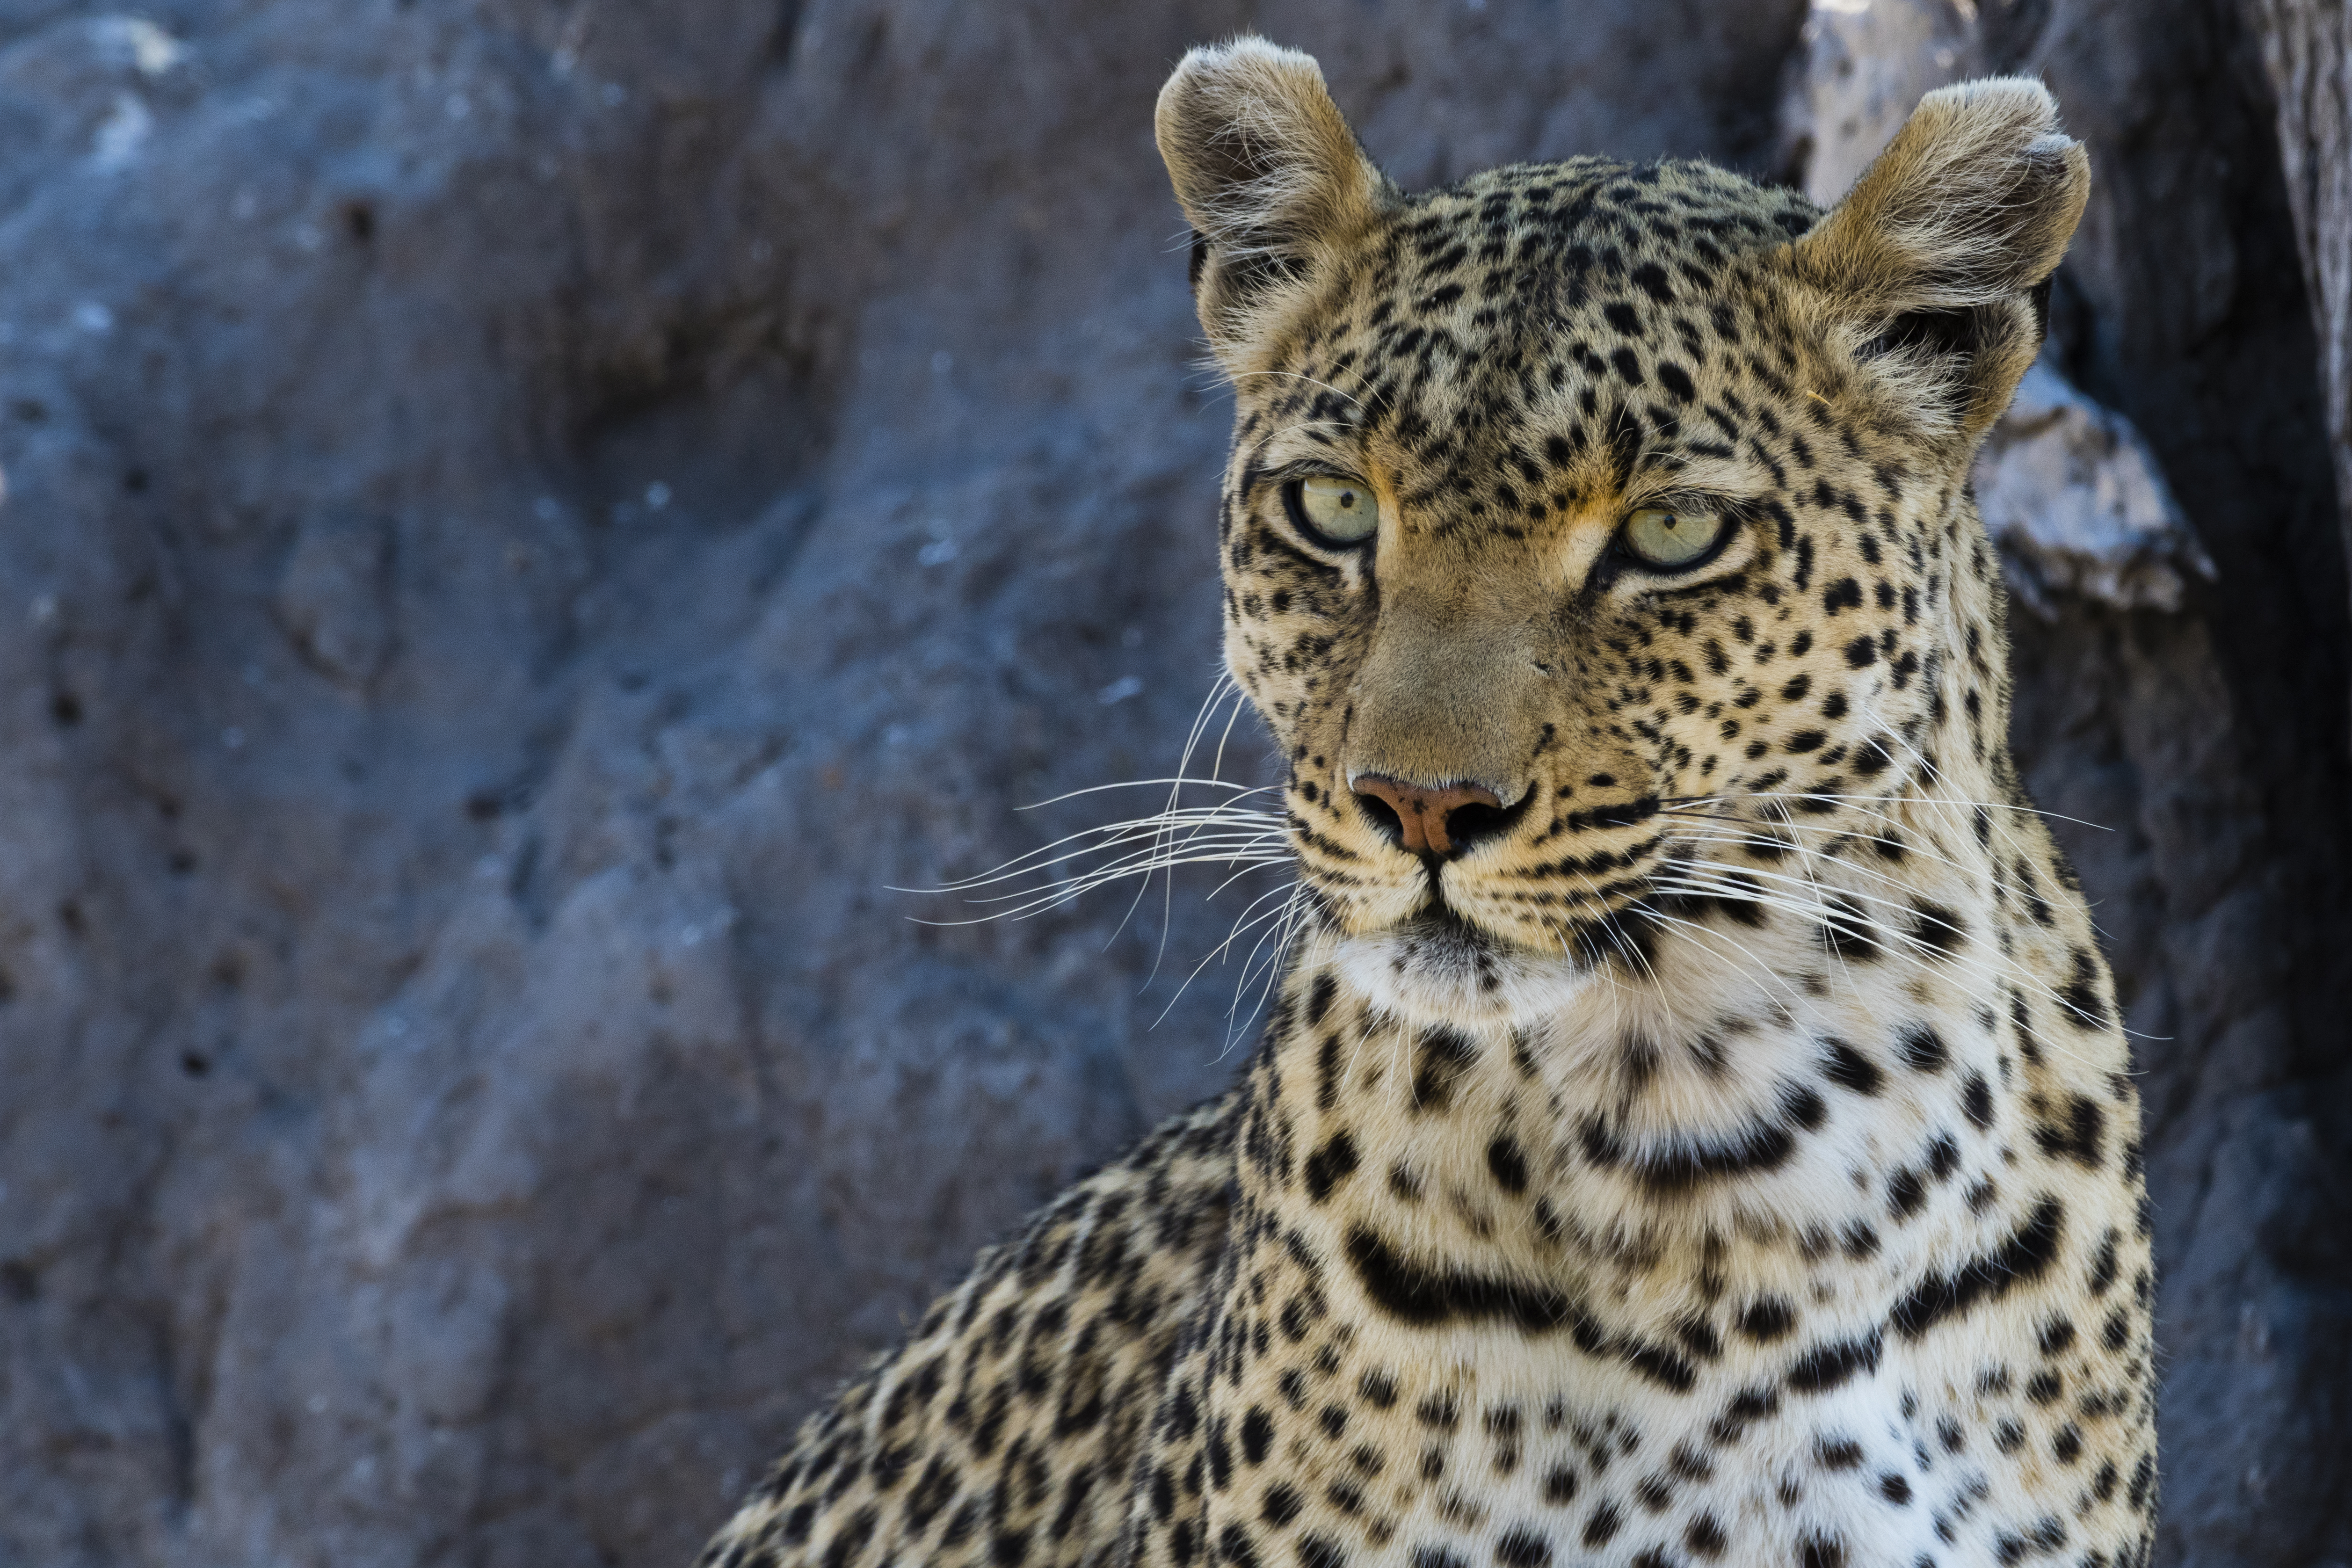 "Picture of leopard"